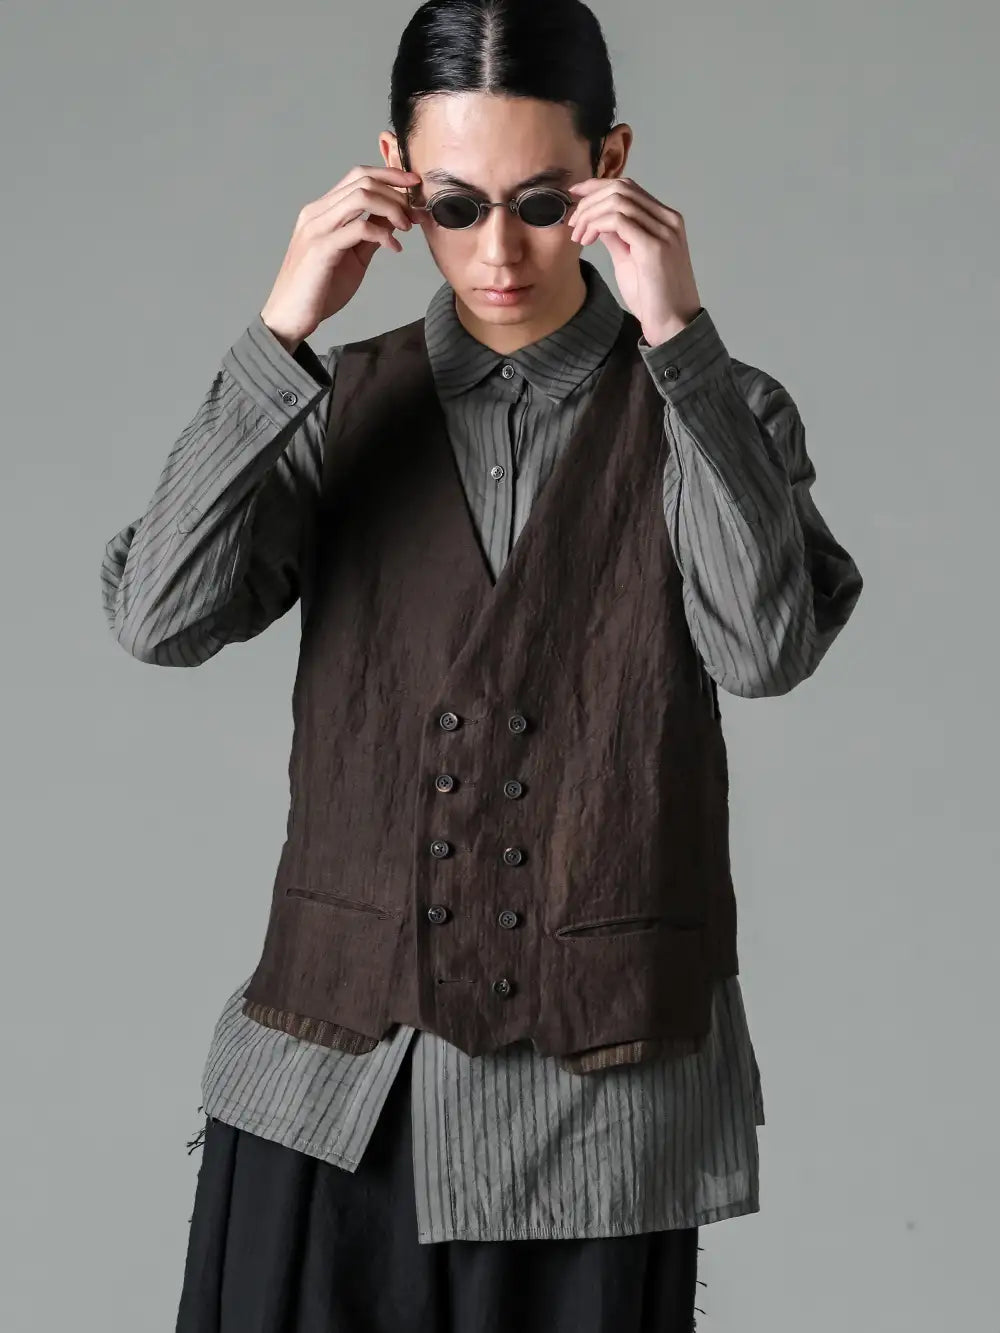 Chiahung Su ZIGGY CHEN 24SS  - Shirts and gilets that are designed to look the way they are supposed to look. - RG1008ZC-VINTAGE OLIVE ZIGGY CHEN x RIGARDS Collaboration RG1008ZC / VINTAGE OLIVE x BRONZE (CLIP) DARK GRAY LENS - 0M2410101 PatchWork Double Breasted Waist Coat - SS24-FS8-COS Asymmetrical Hand Dyed Stripe Shirt 2-001